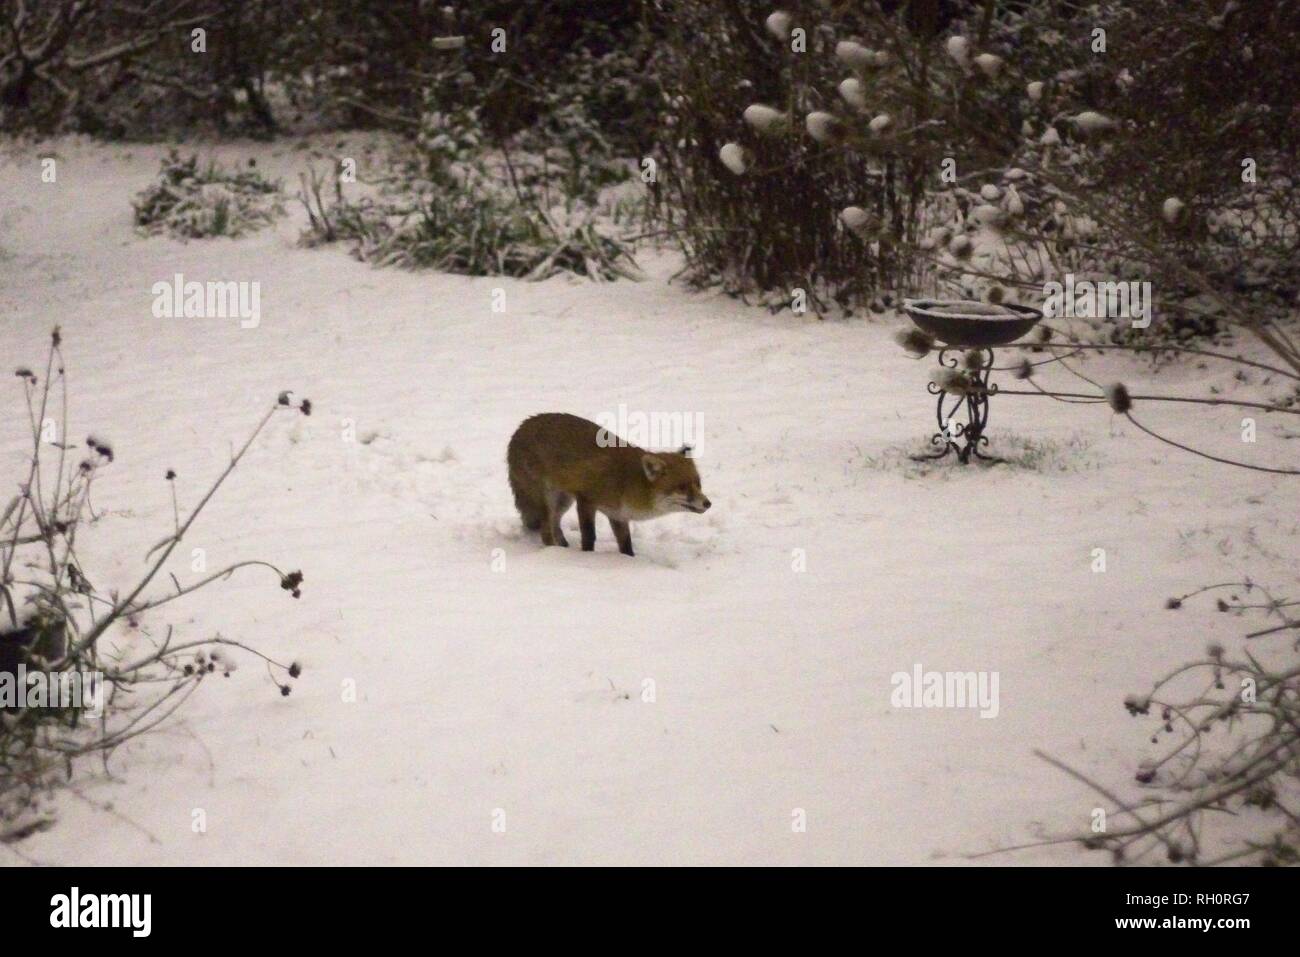 A Fox (vulpes vulpes) visits a garden tonights heavy snowfall reached East Sussex, UK. Stock Photo